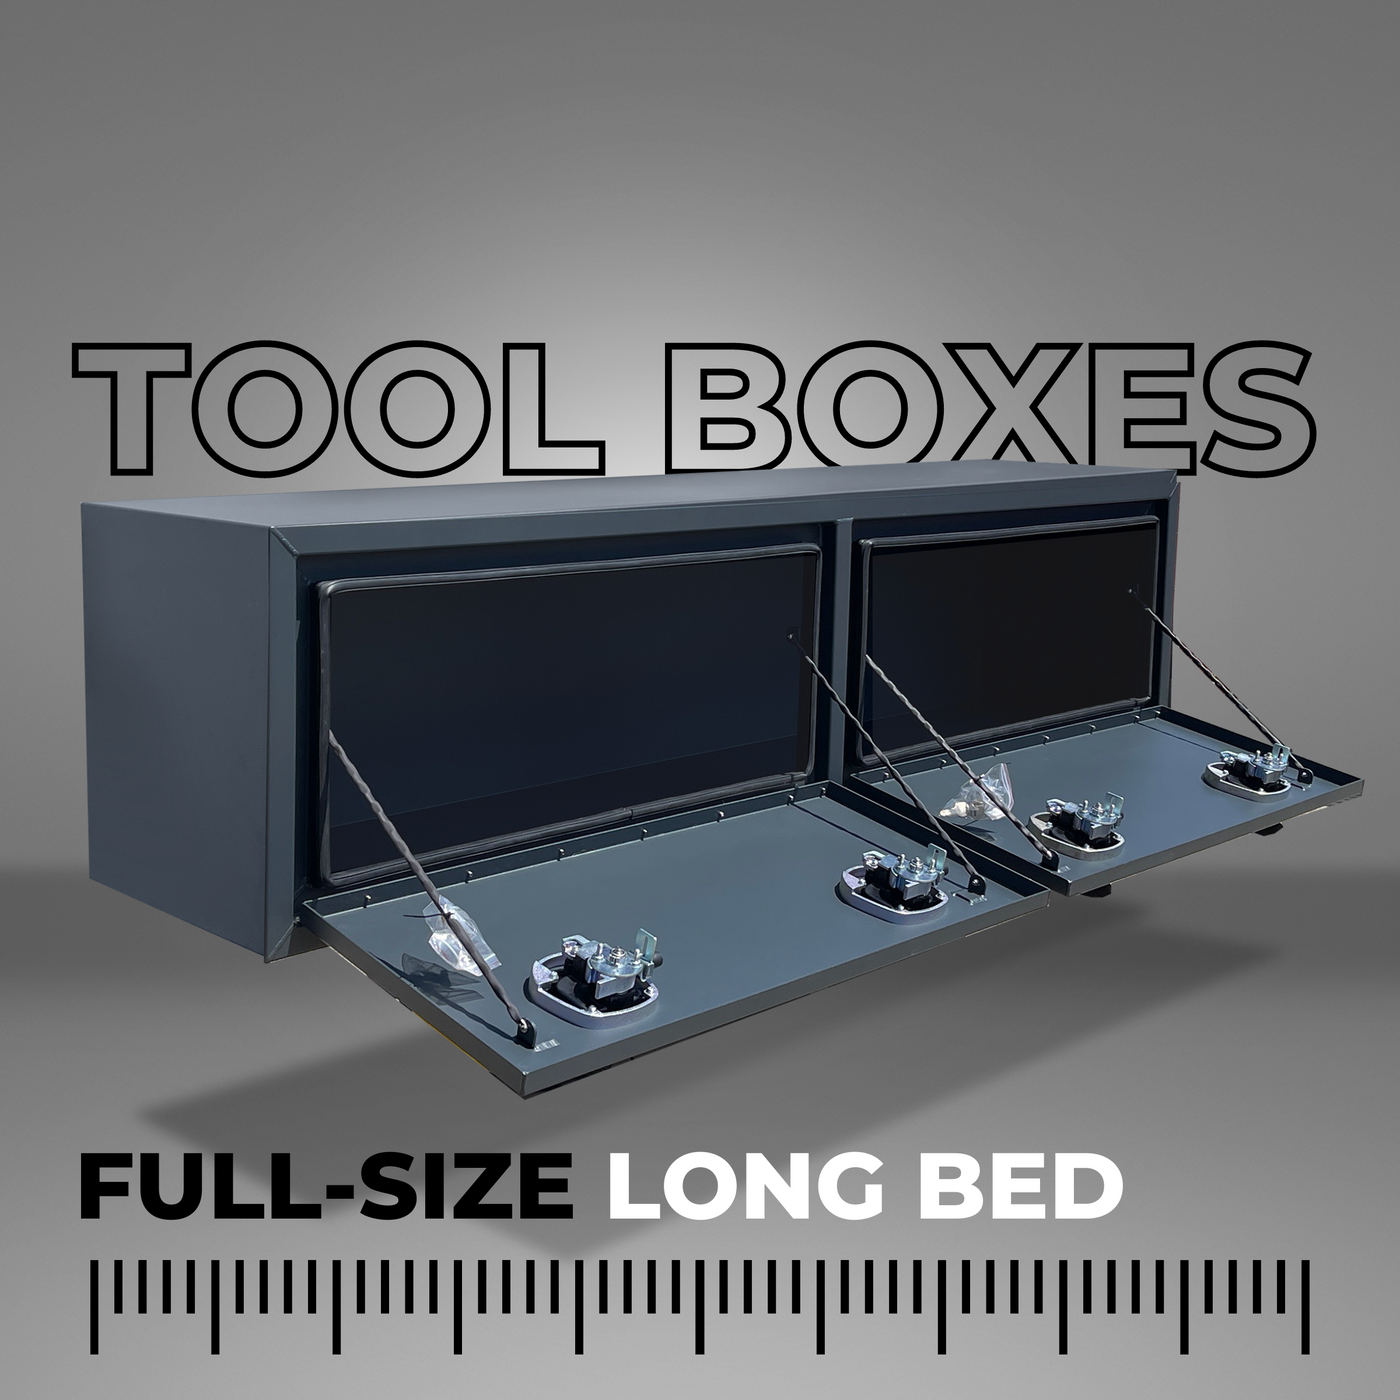 Tool Boxes for Full-Size Long Bed